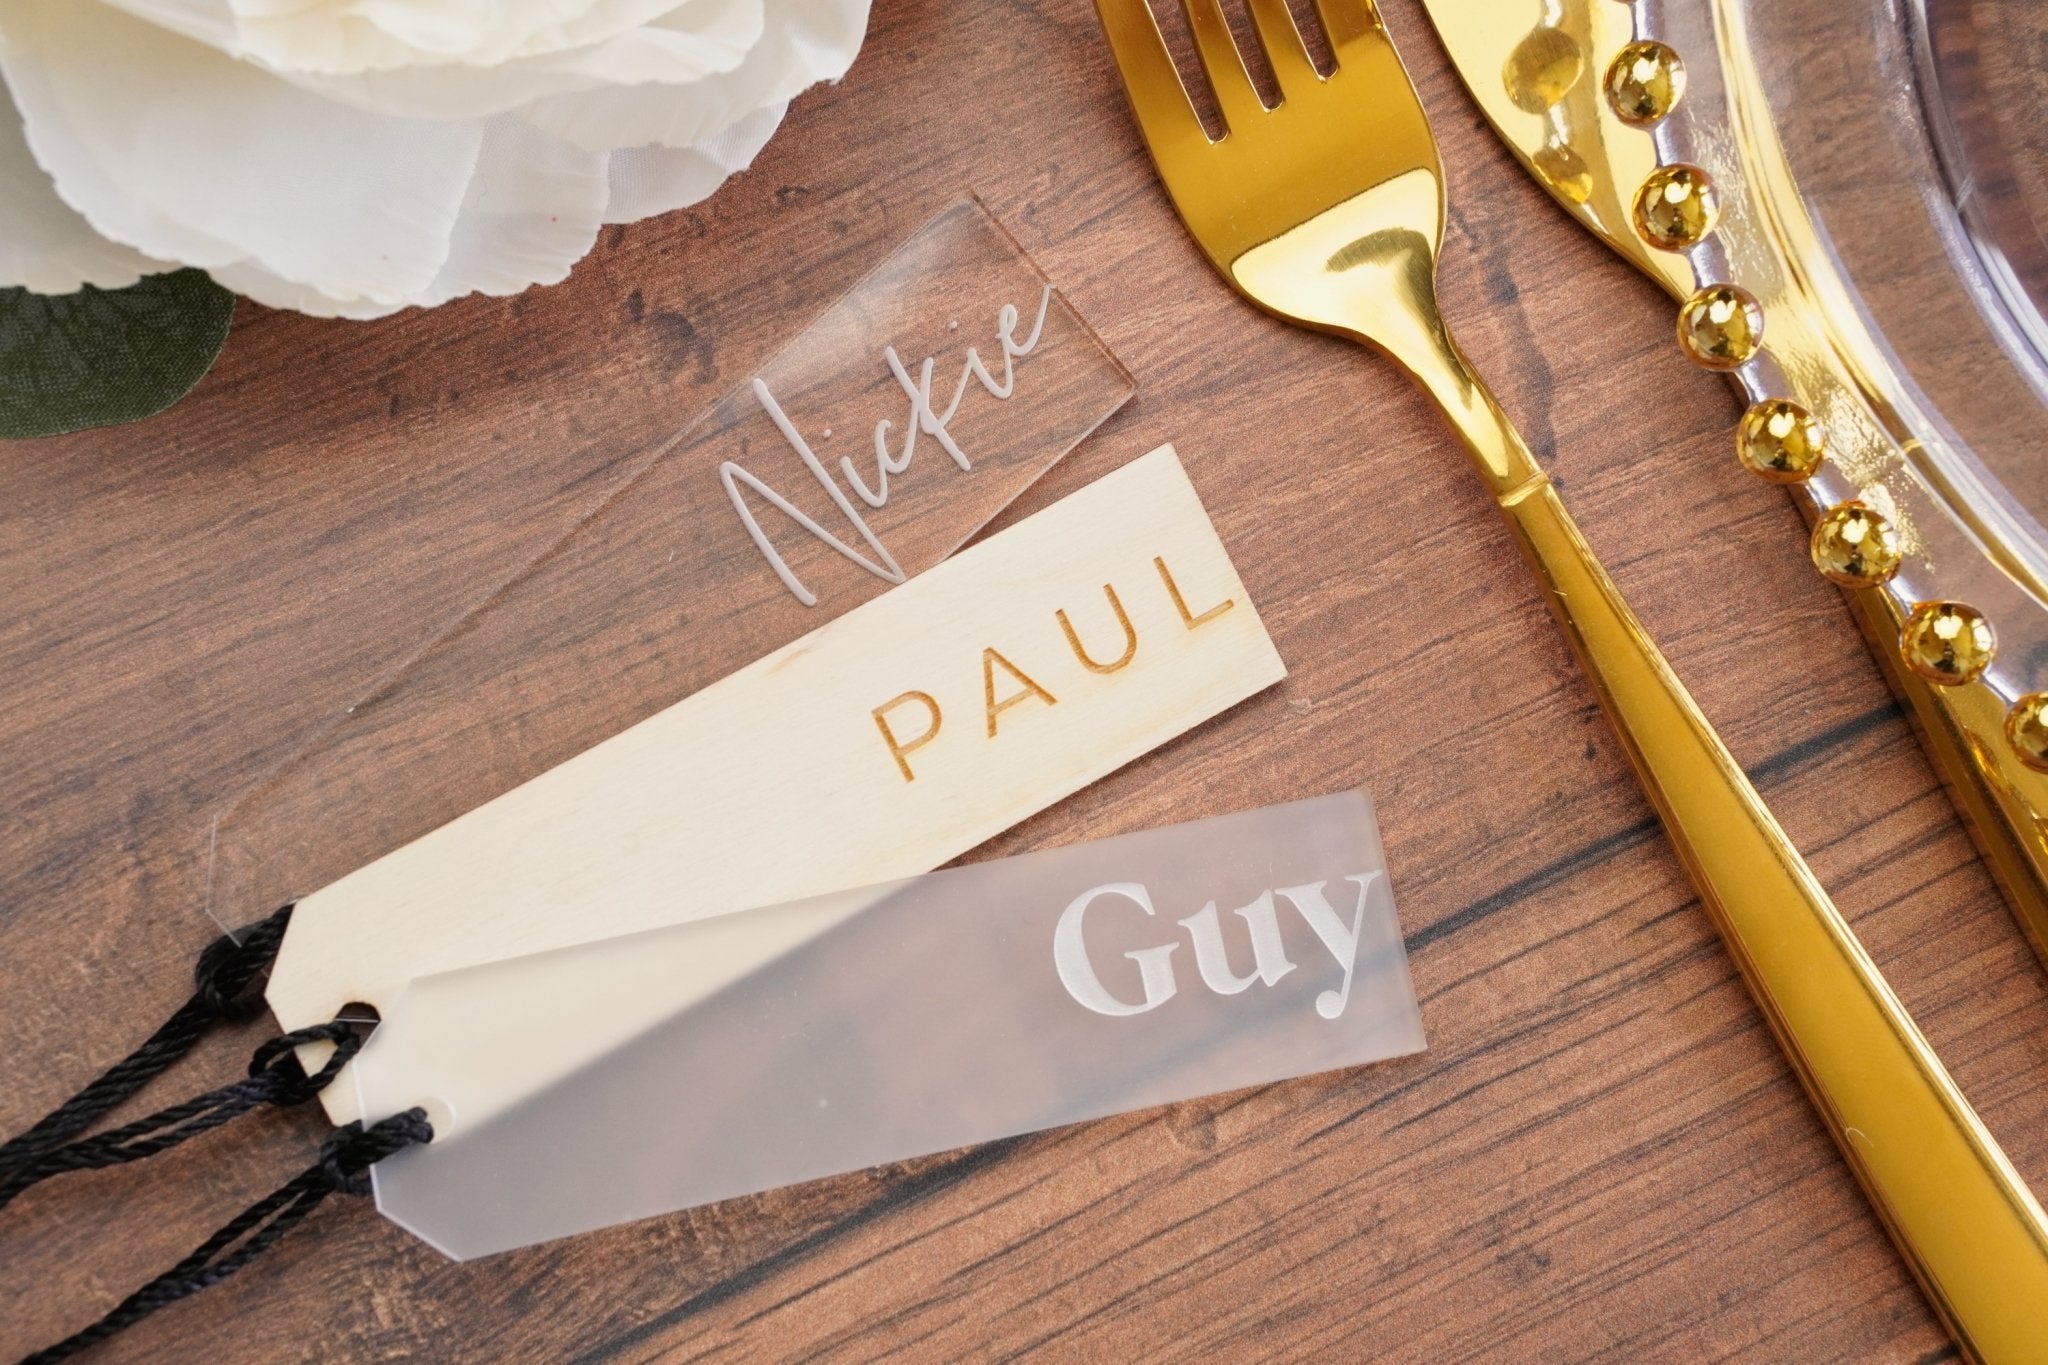 acrylic bookmarks for wedding keepsakes and table decoration